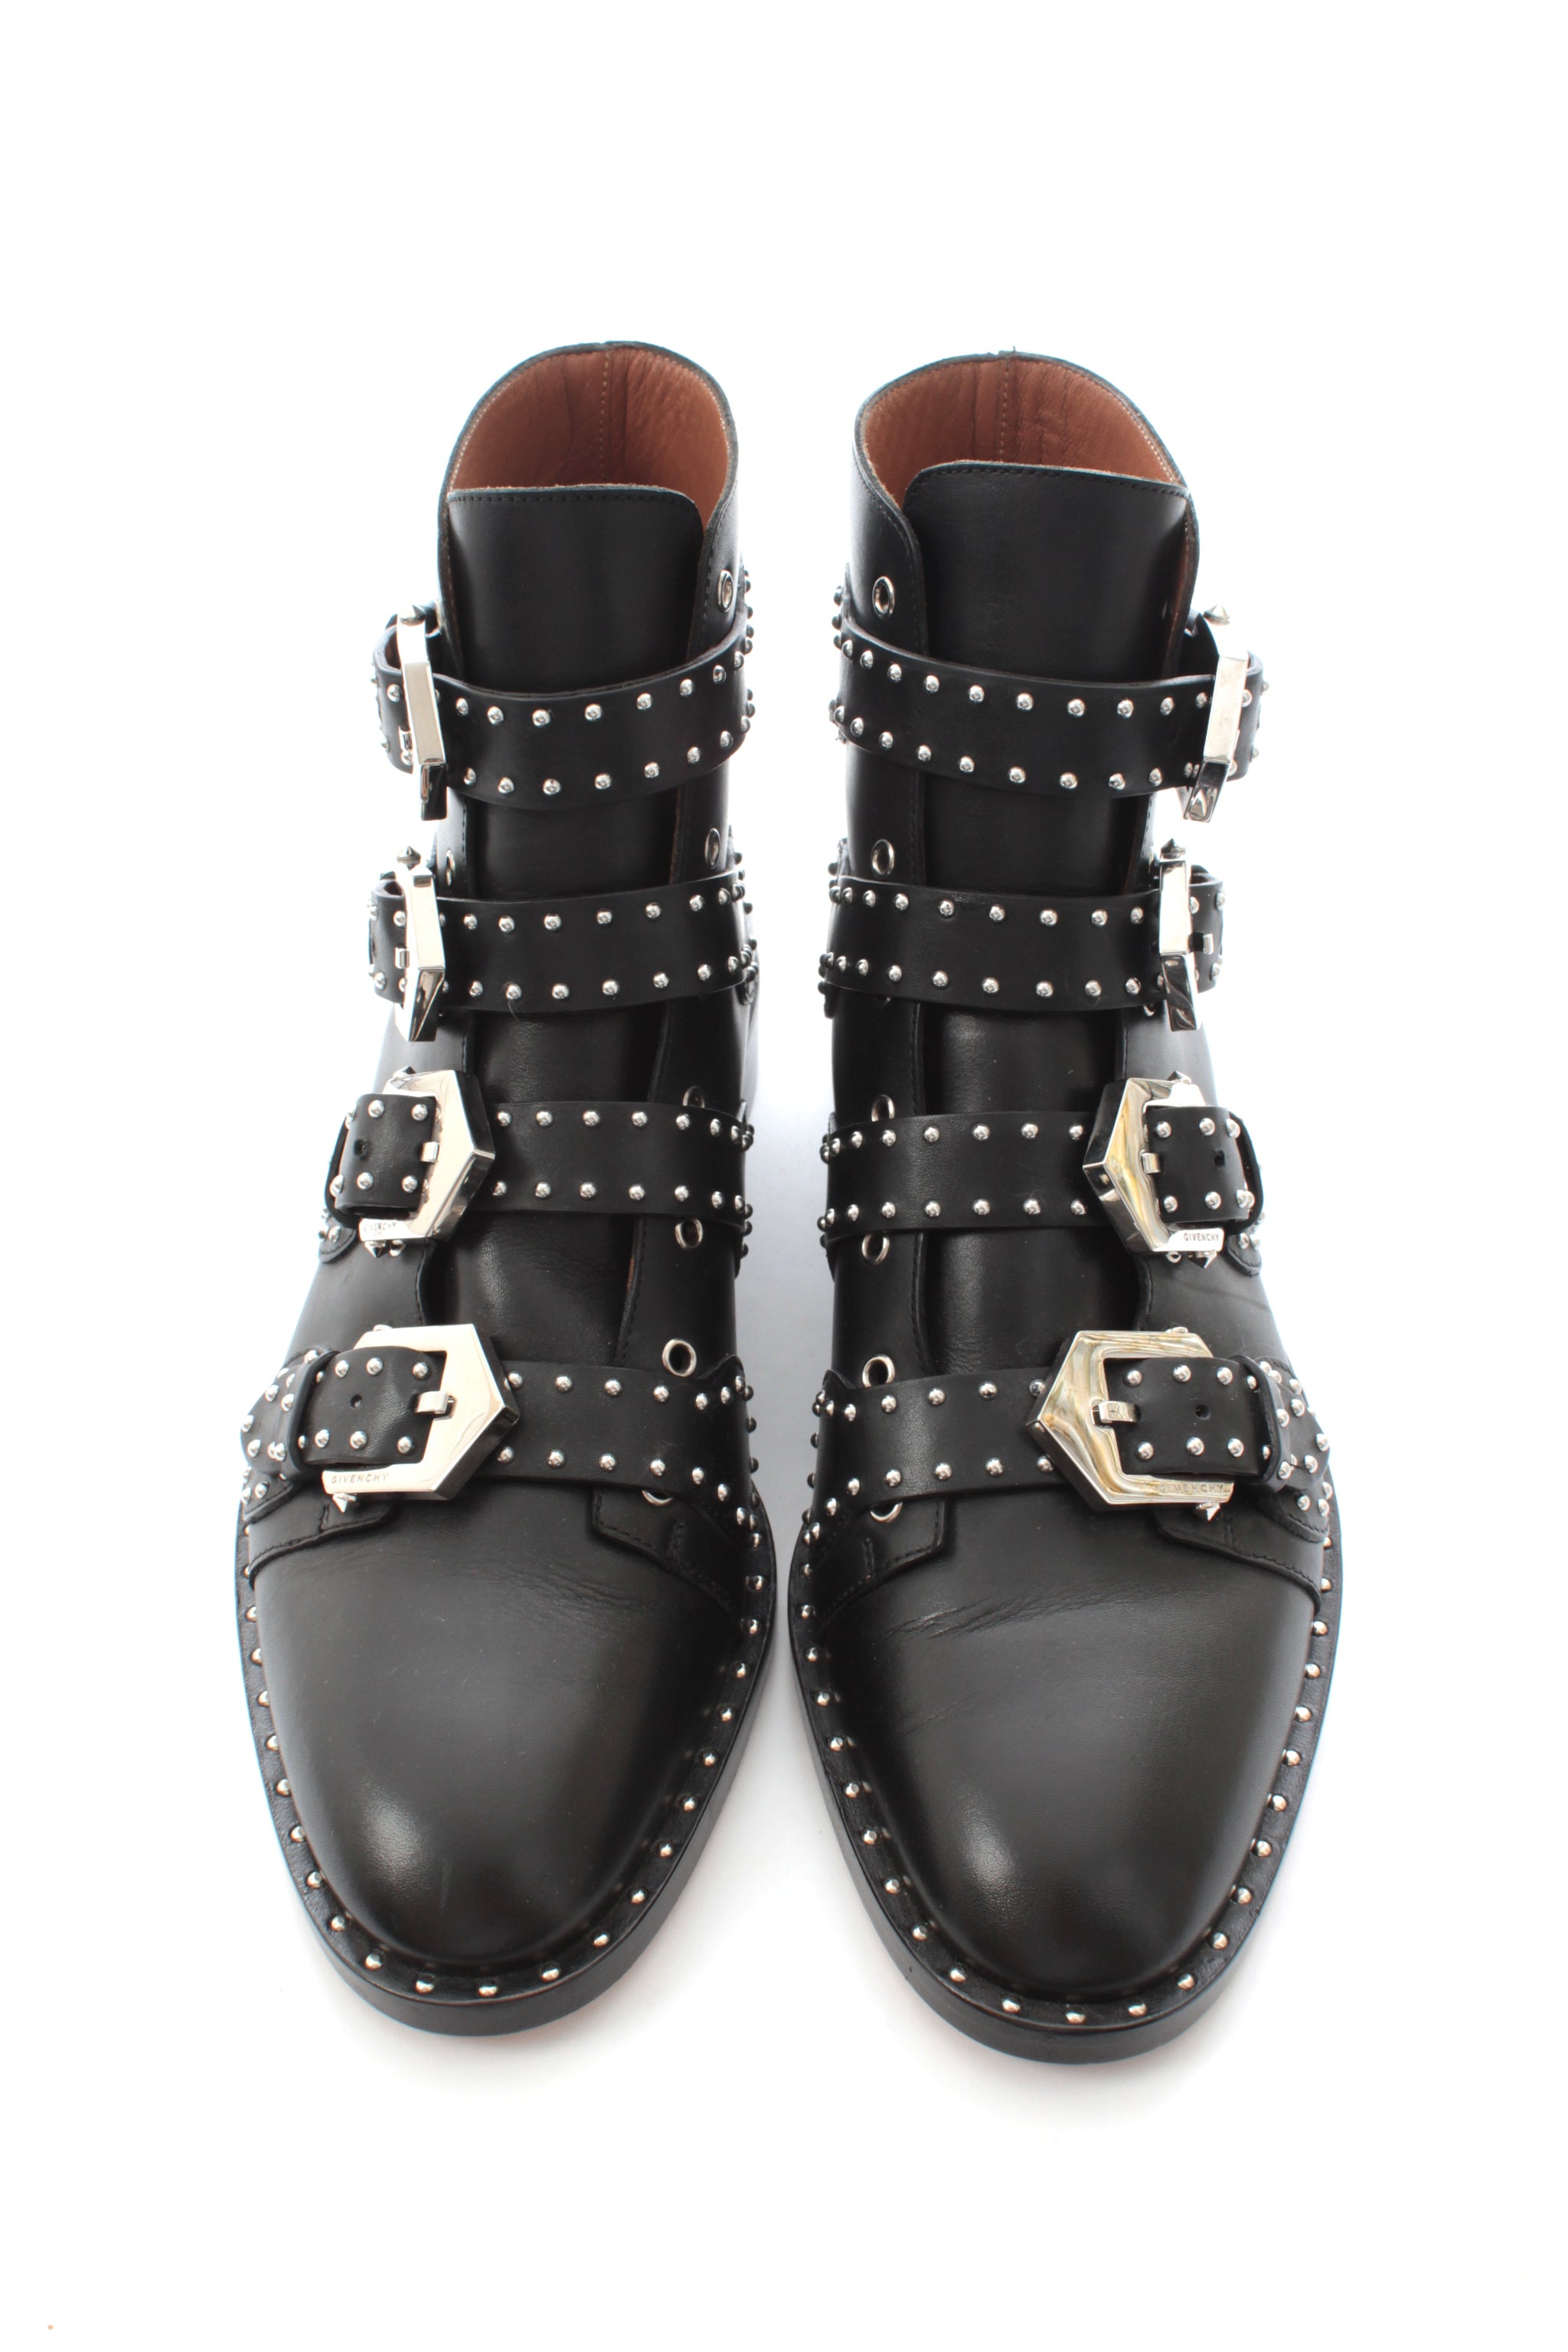 givenchy prue boots